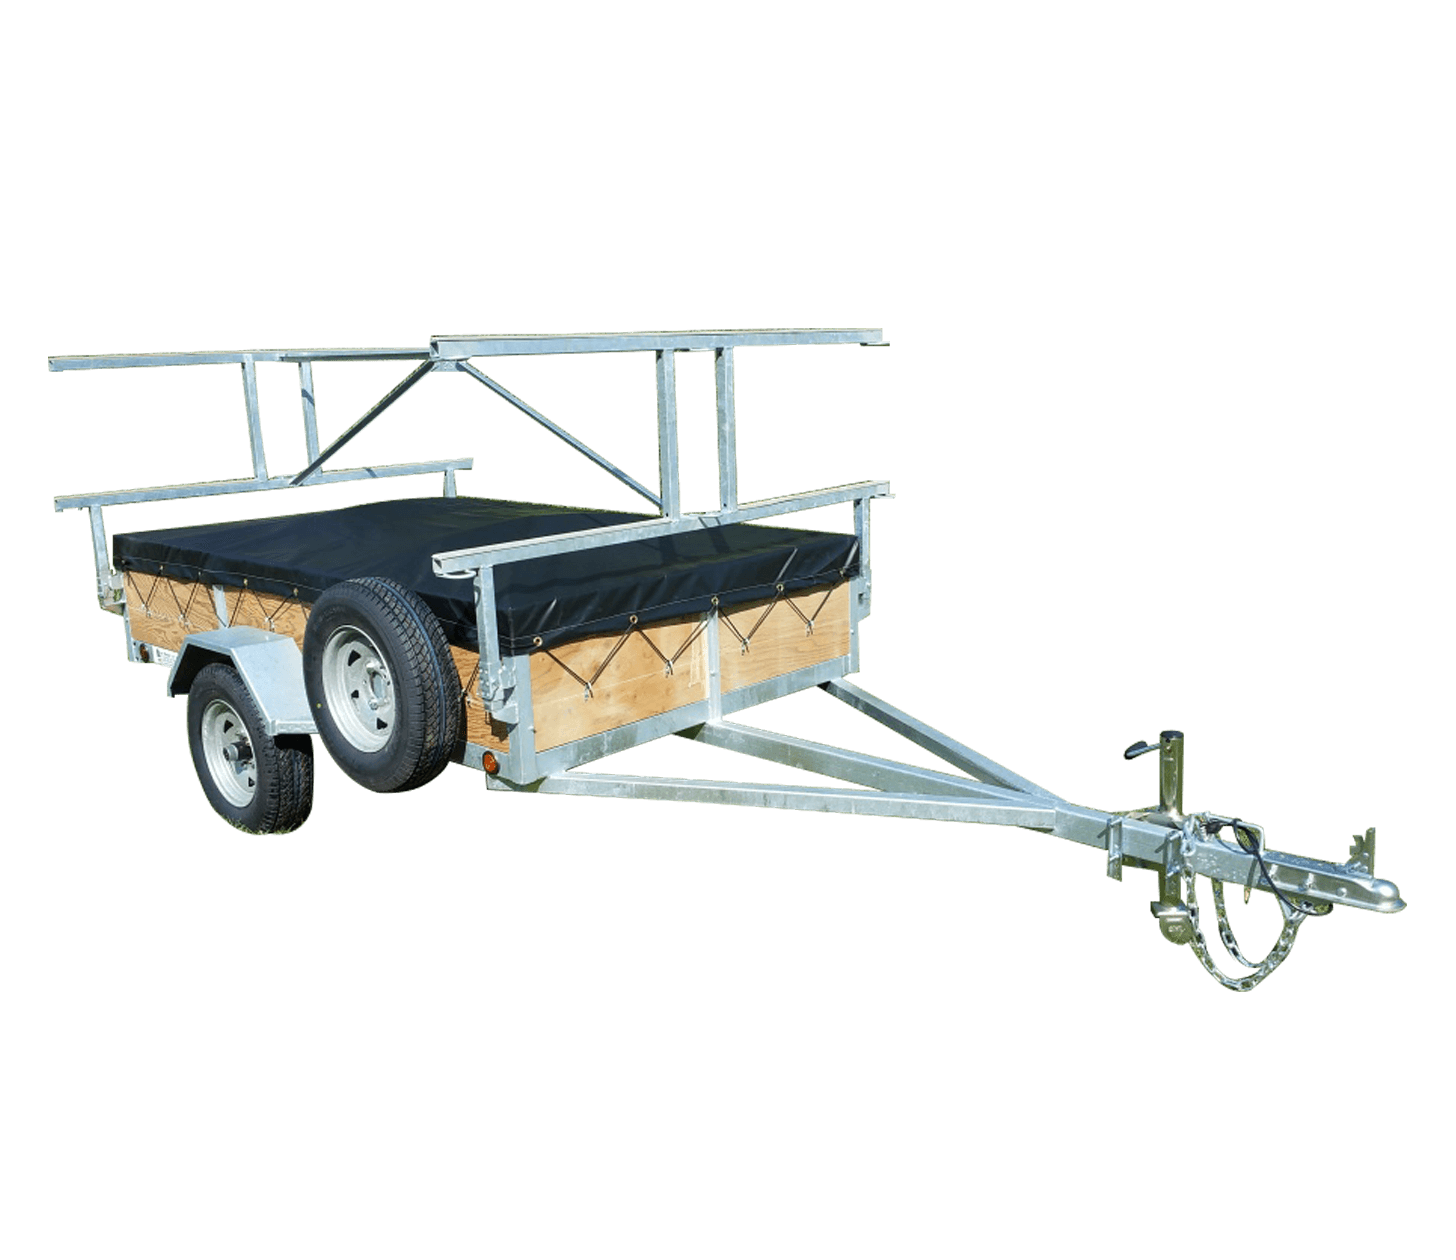 4 Place Kayak And Canoe Trailer Reviews